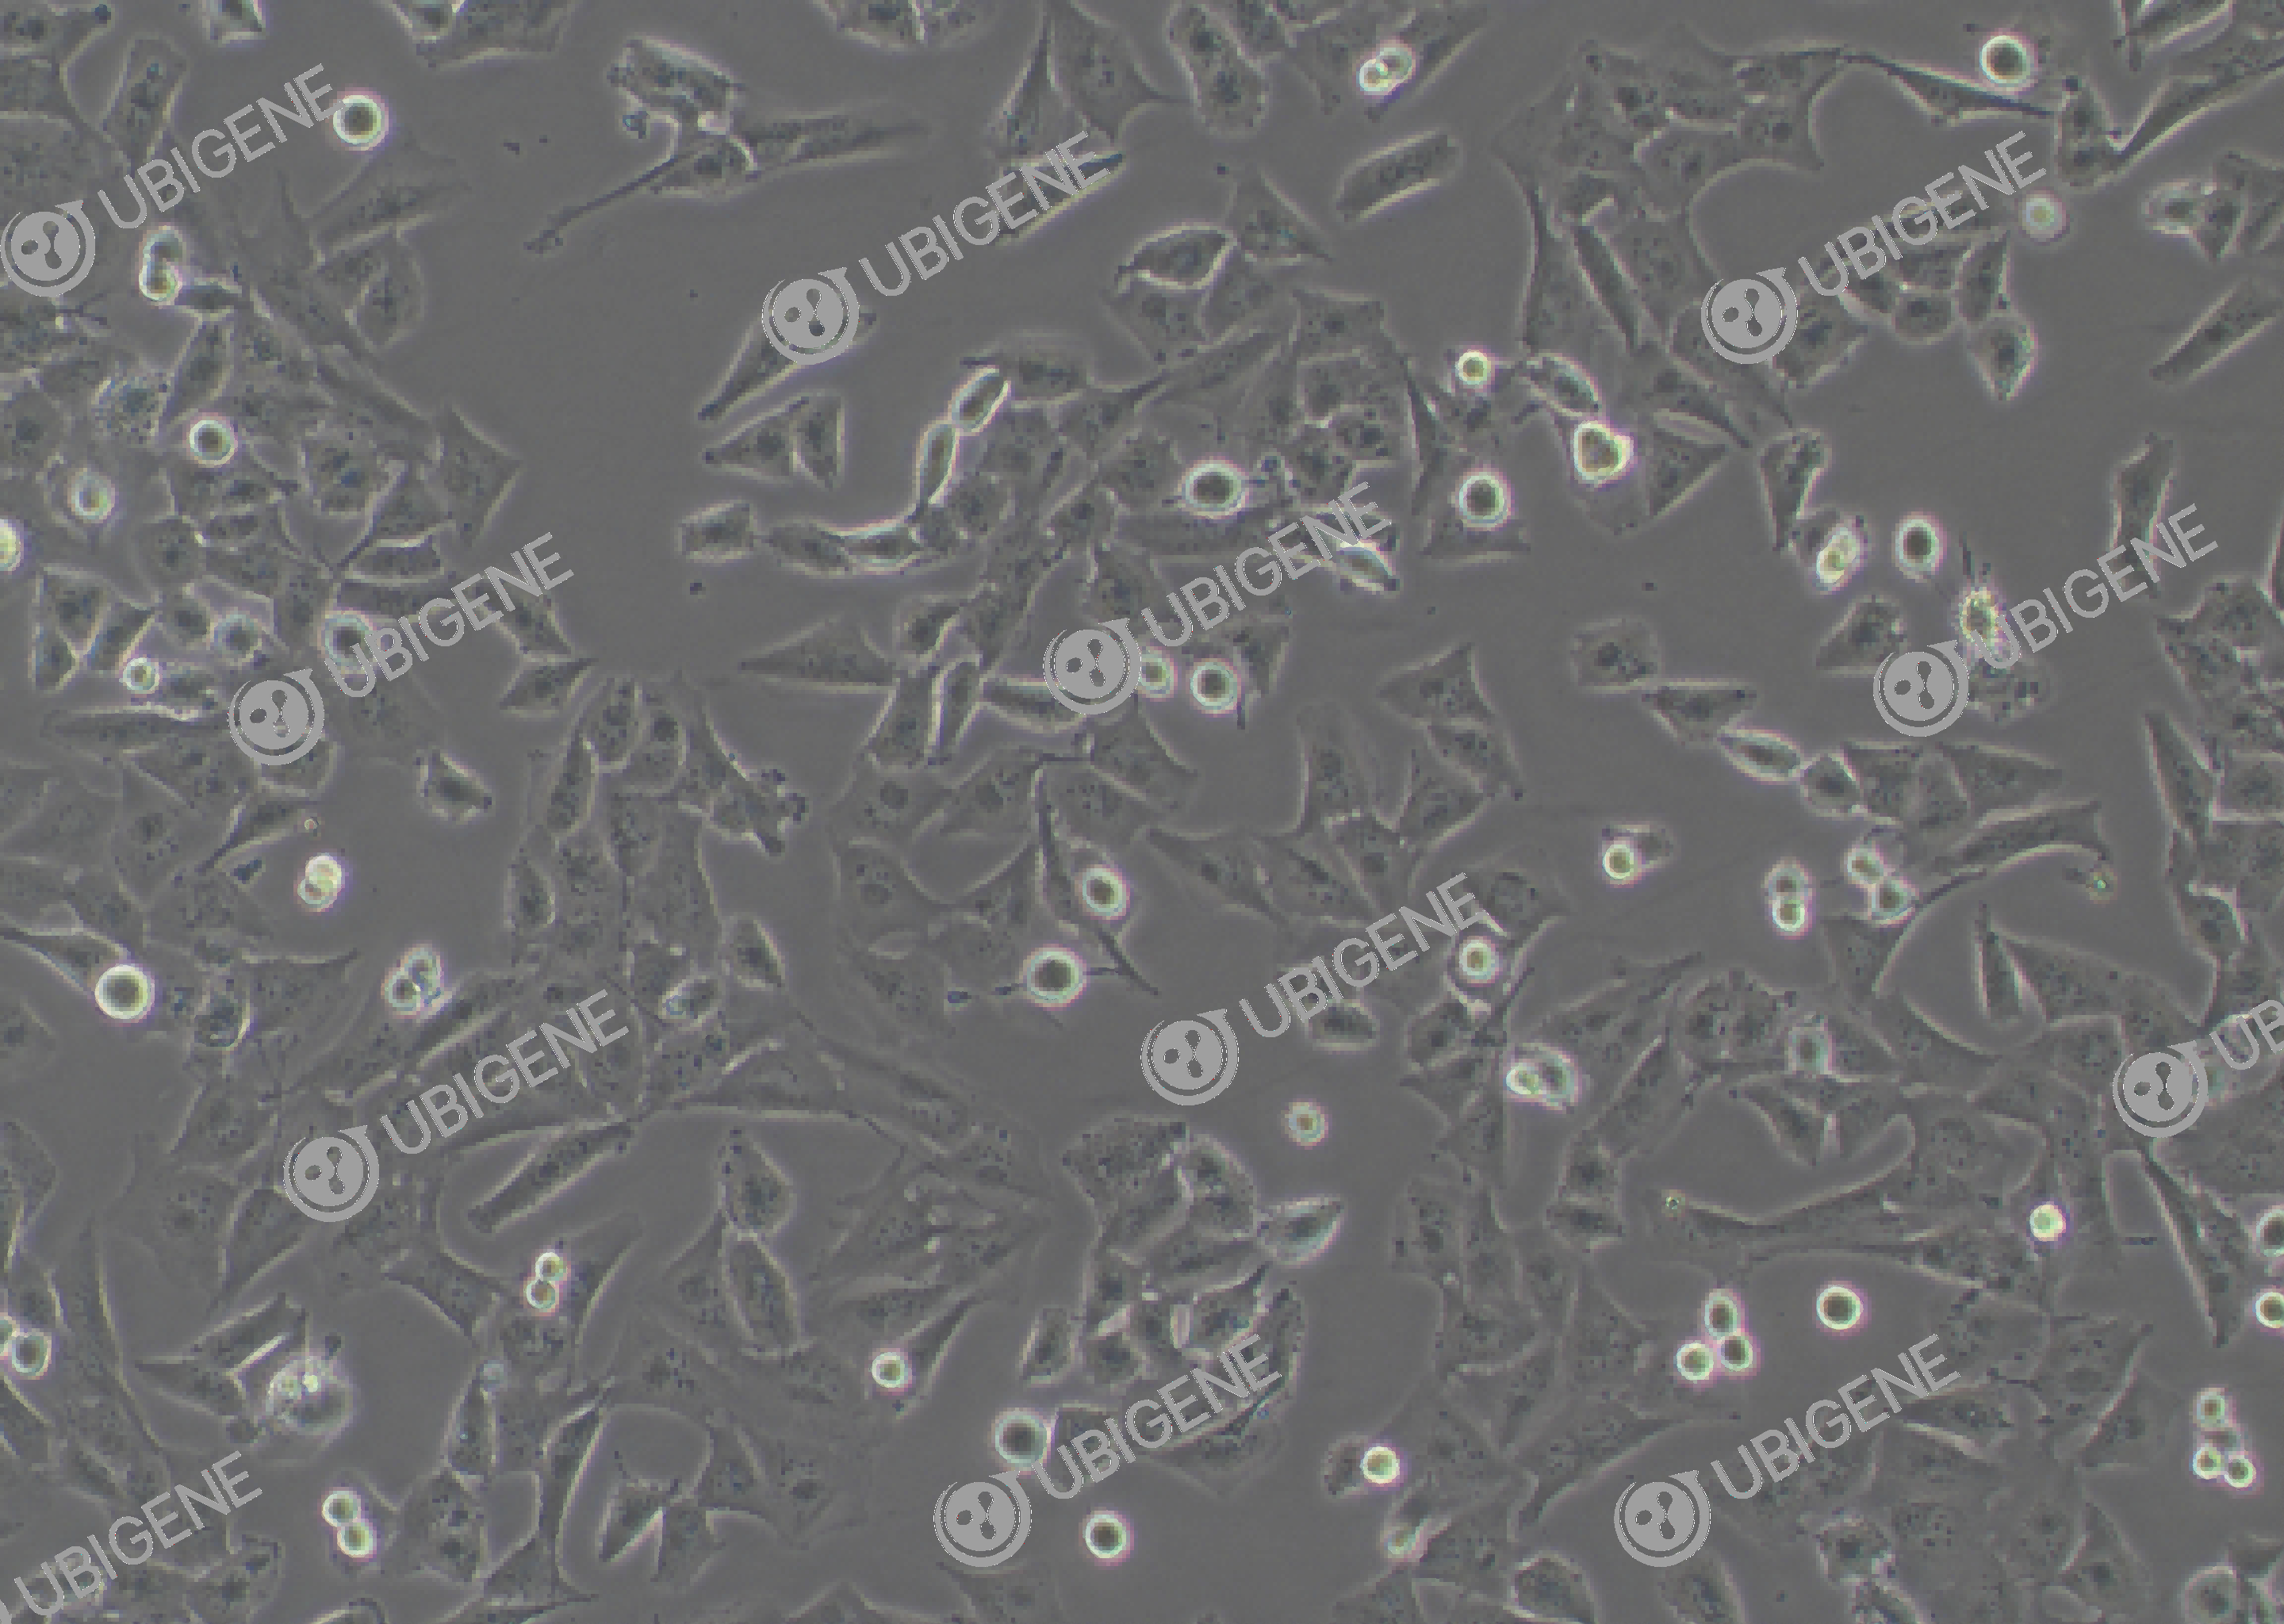 T98G cell line Cultured cell morphology